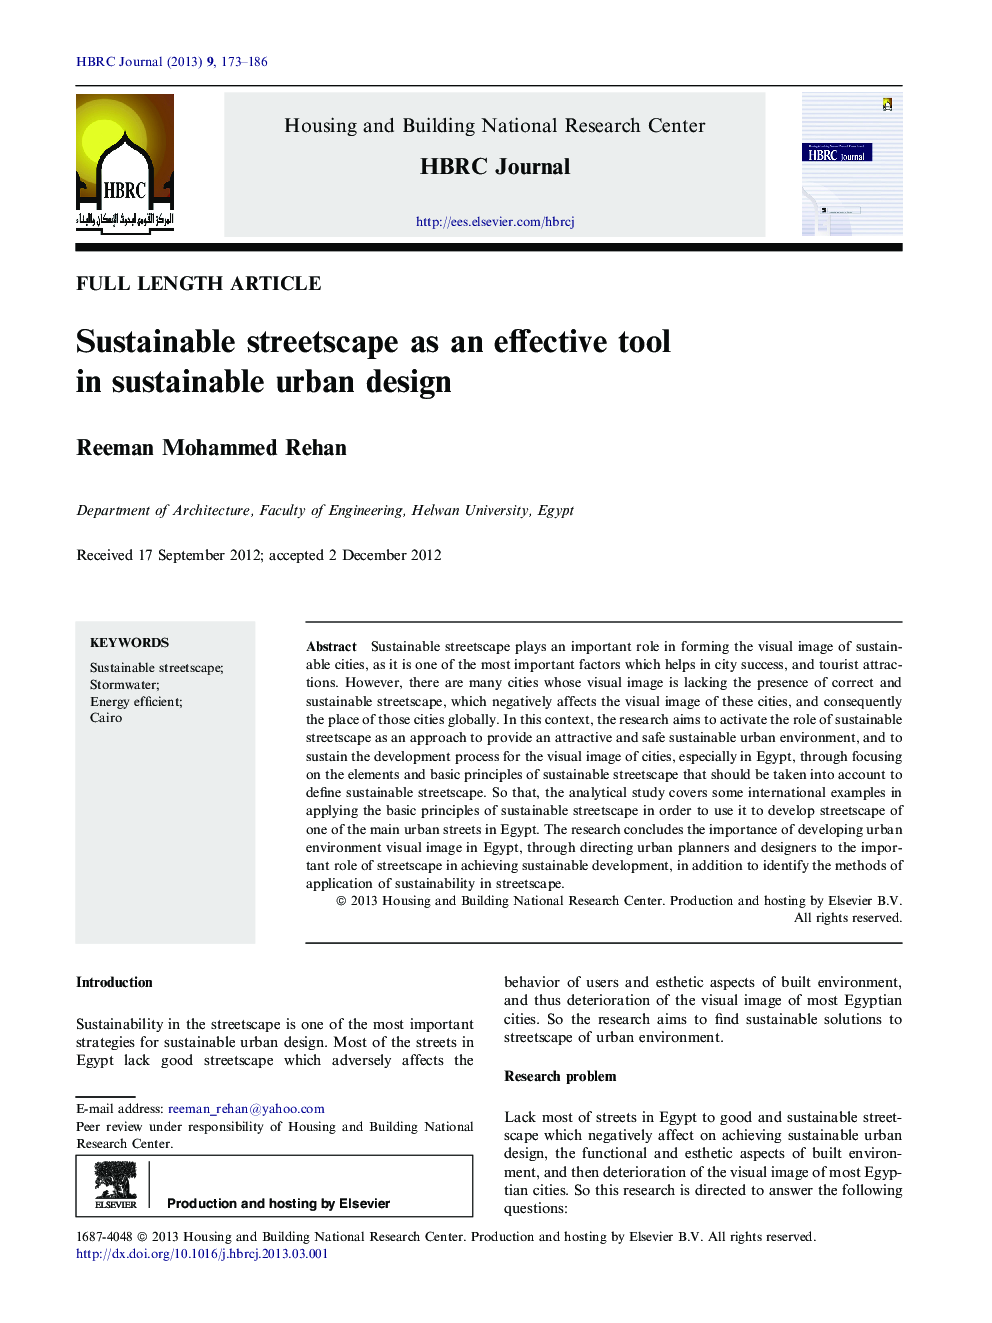 Sustainable streetscape as an effective tool in sustainable urban design 